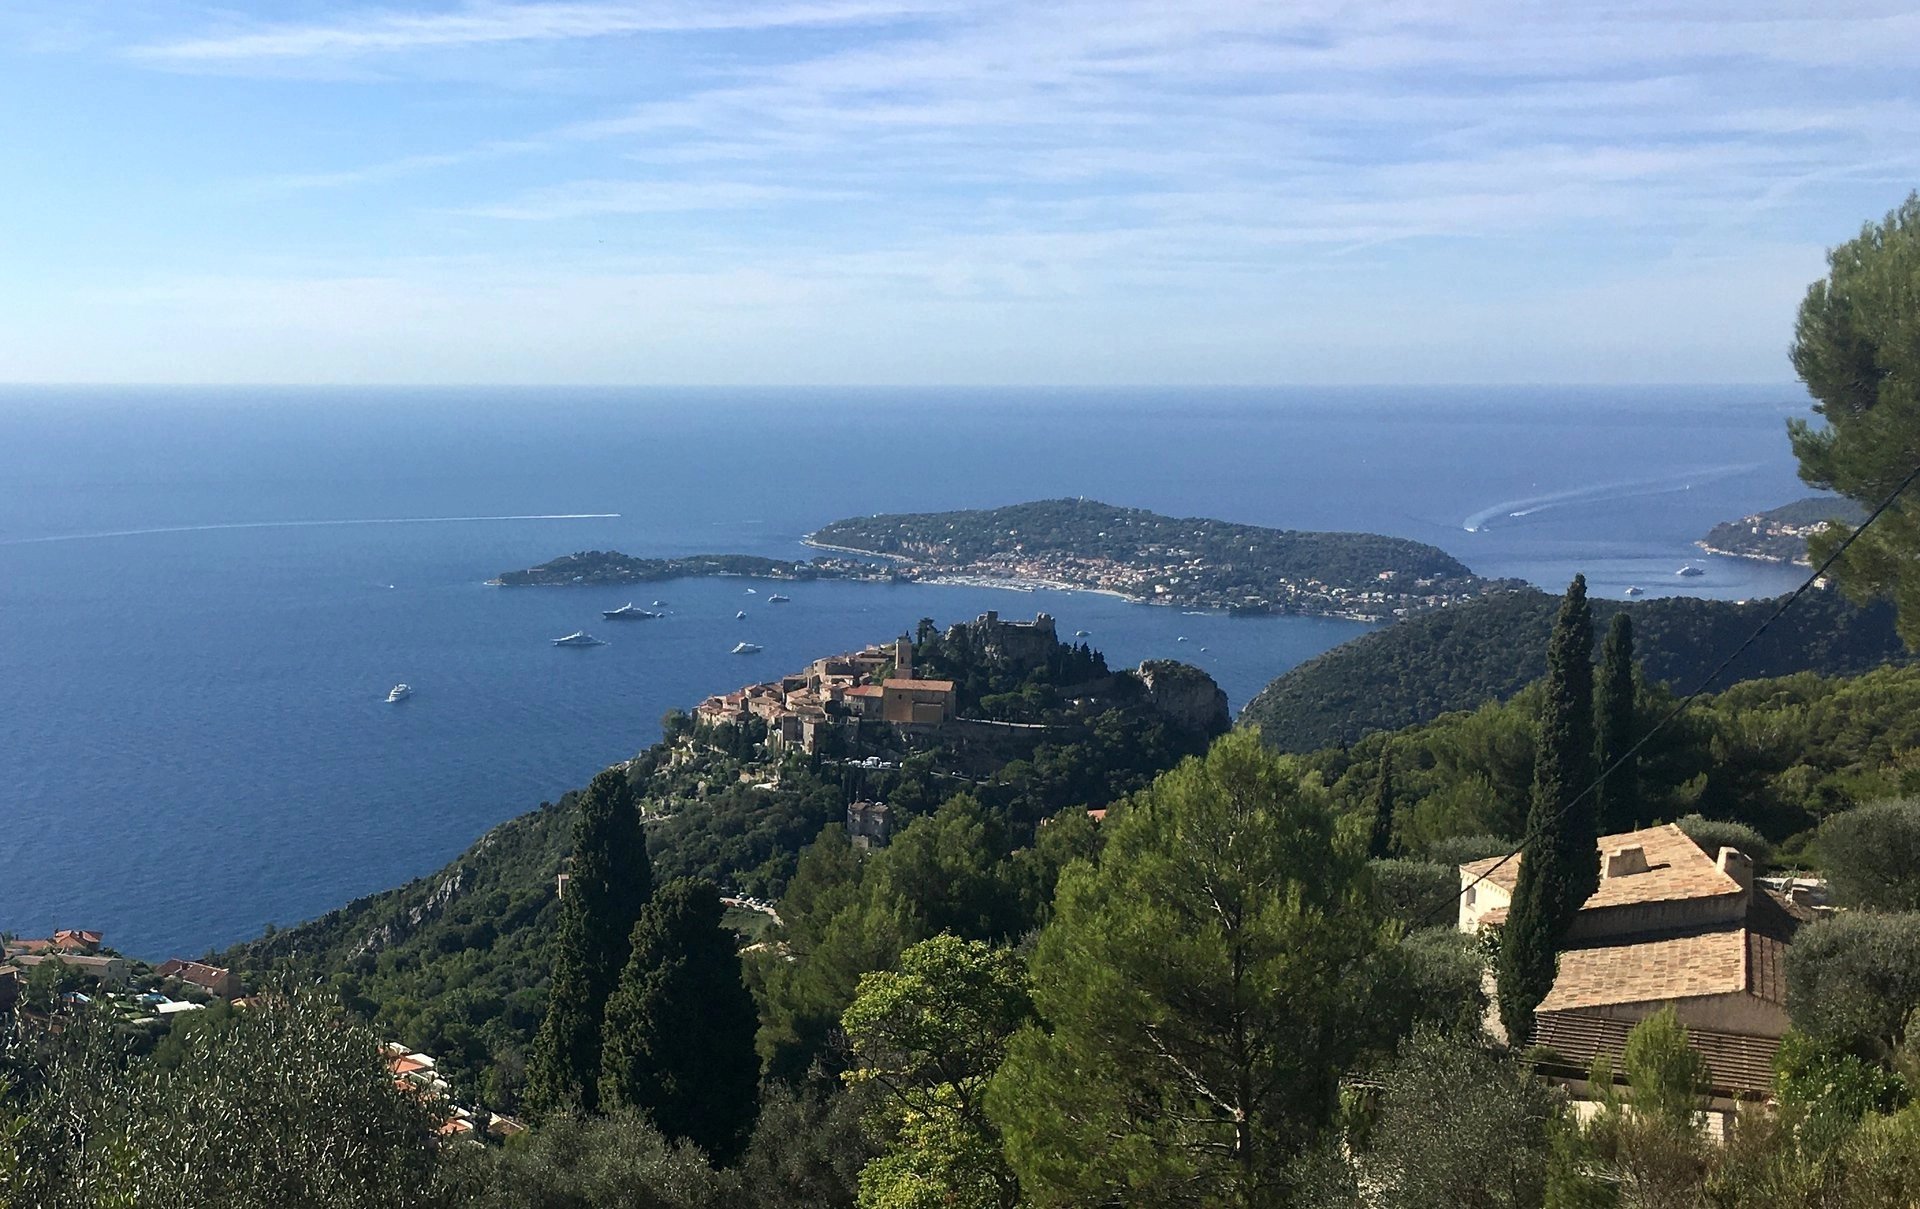 Hotel close to Monaco with 9 % rentability